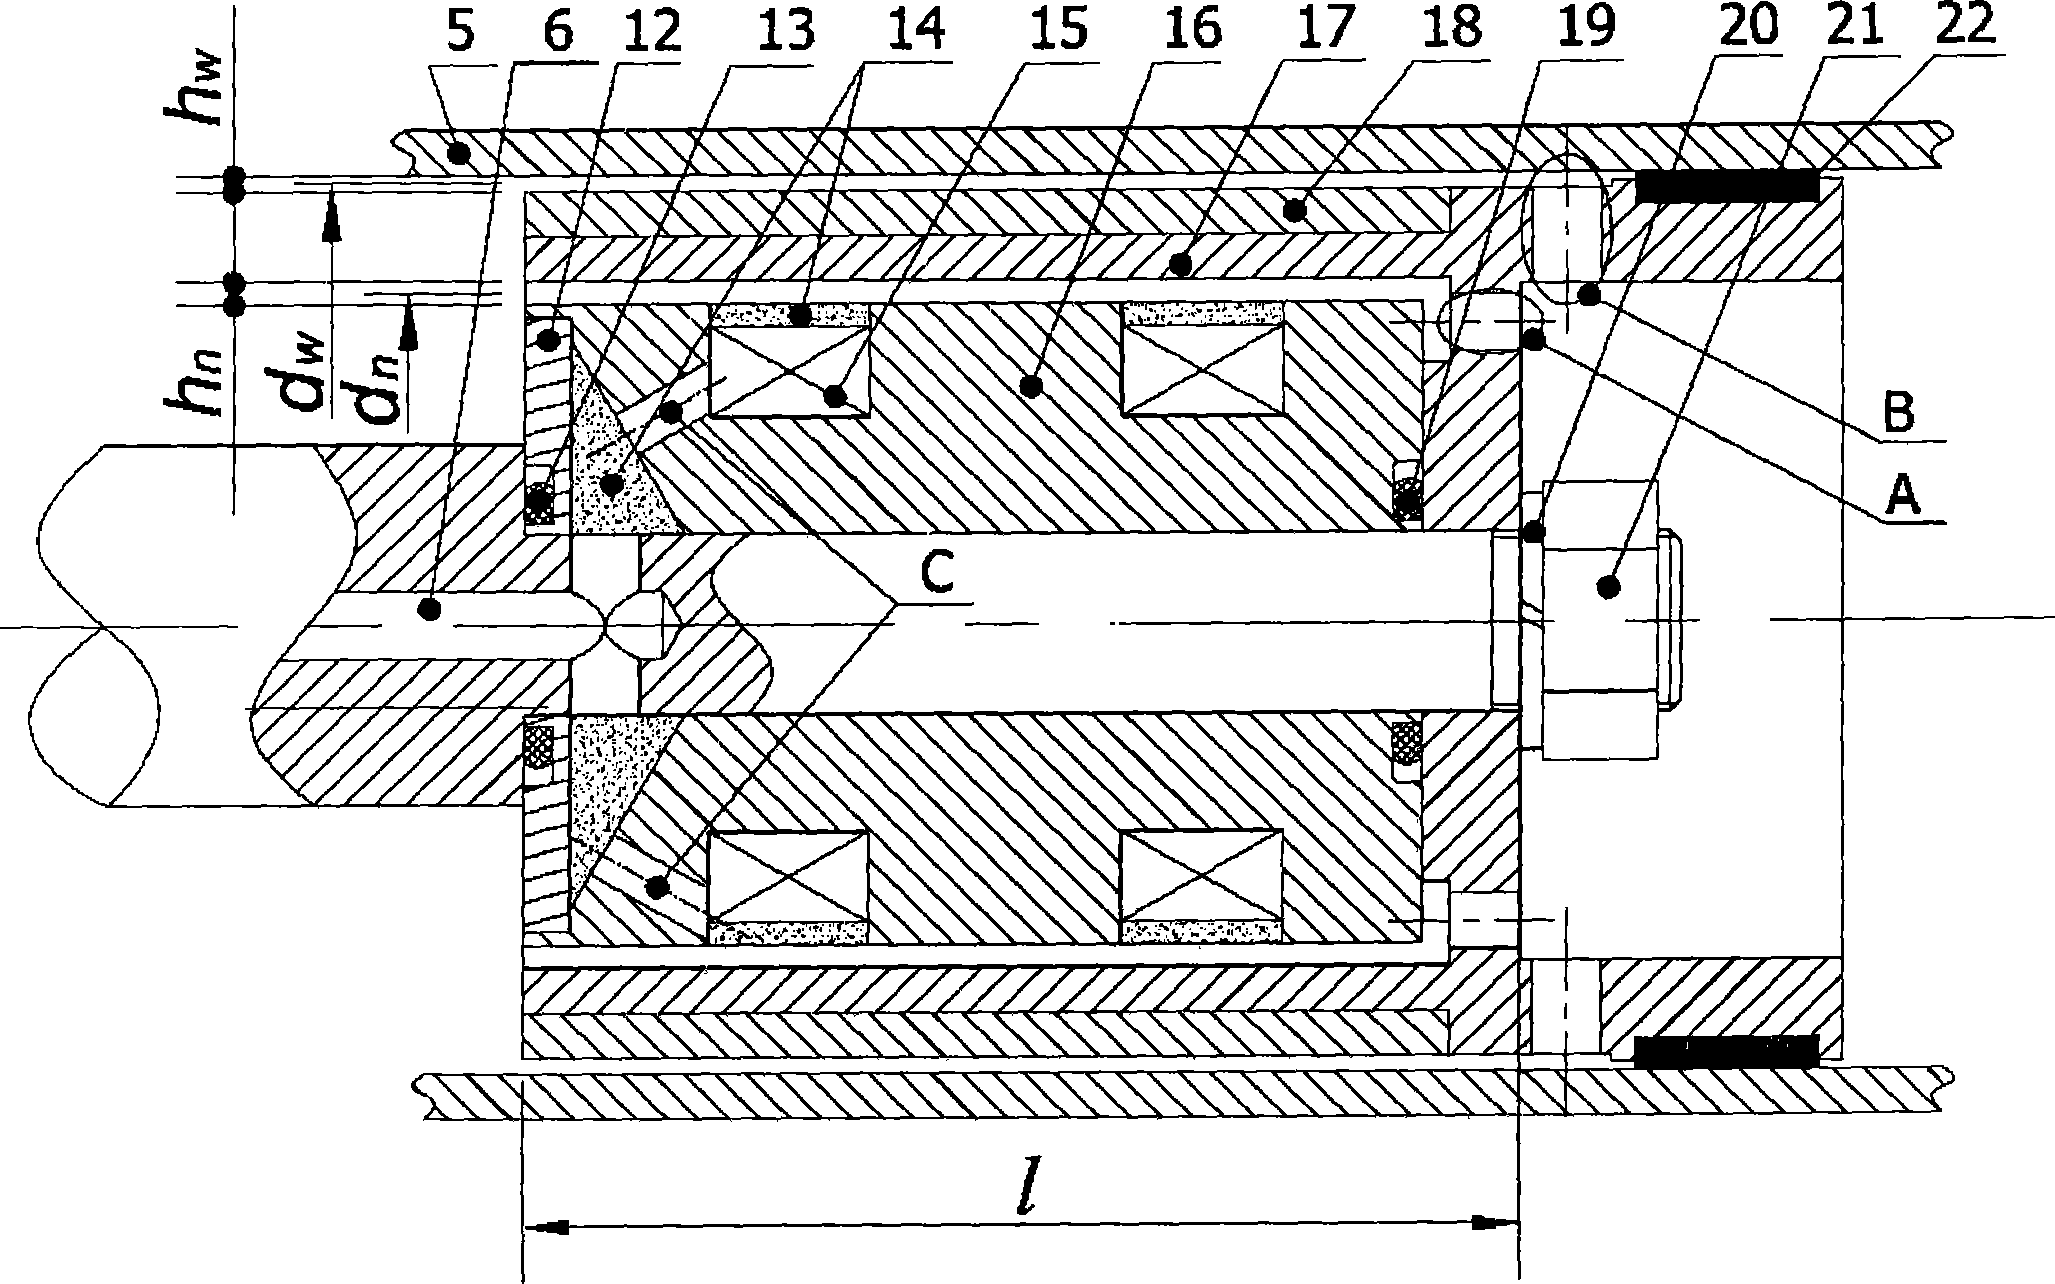 Two-channel magnetorheological damper with passage gating capability